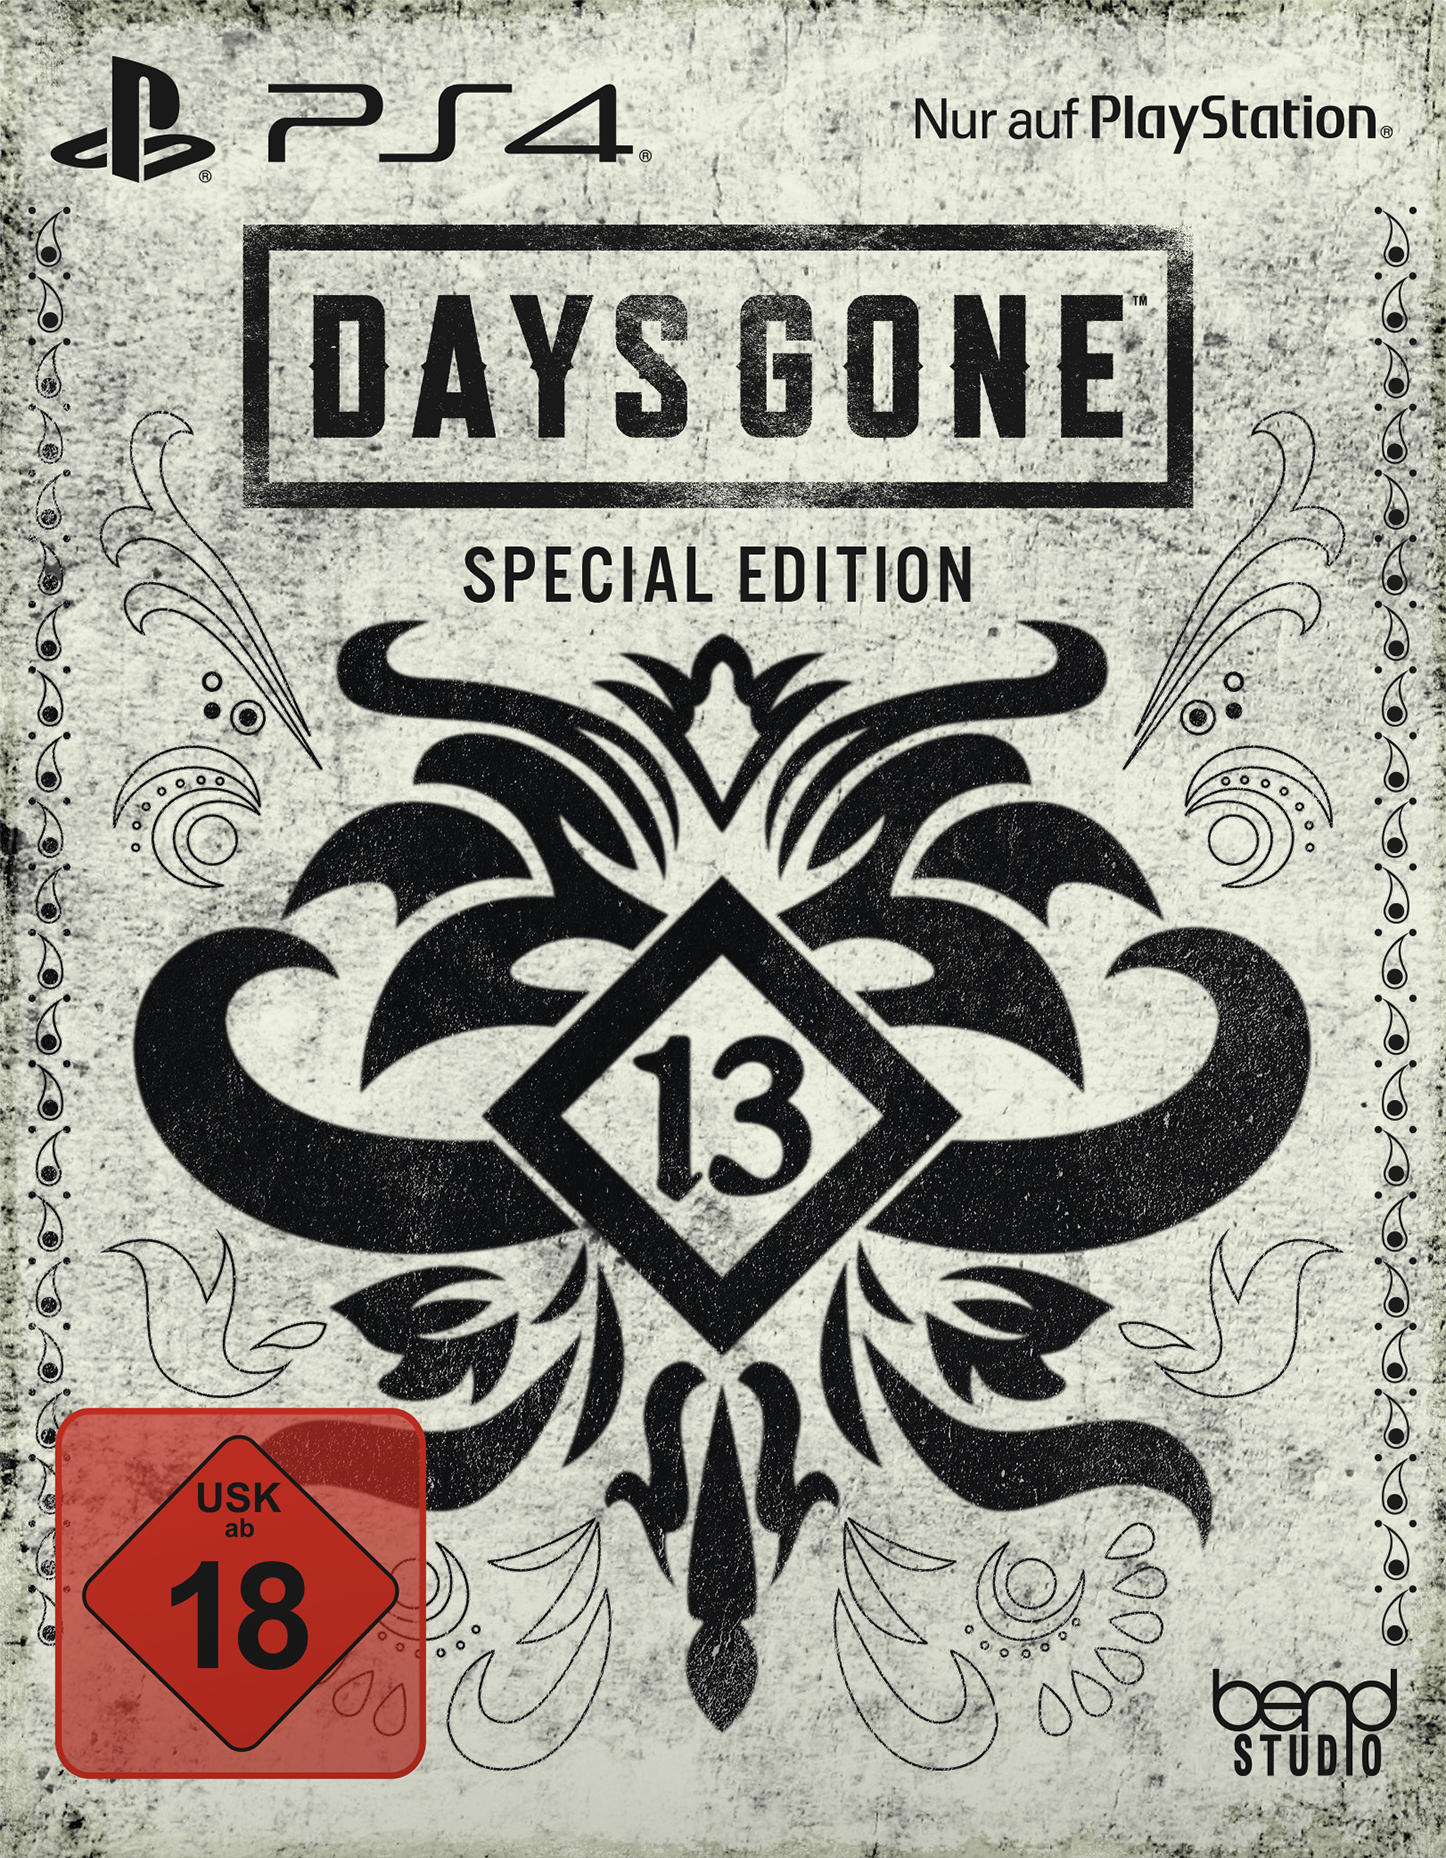 Edition [PlayStation - Gone - 4] Days Special